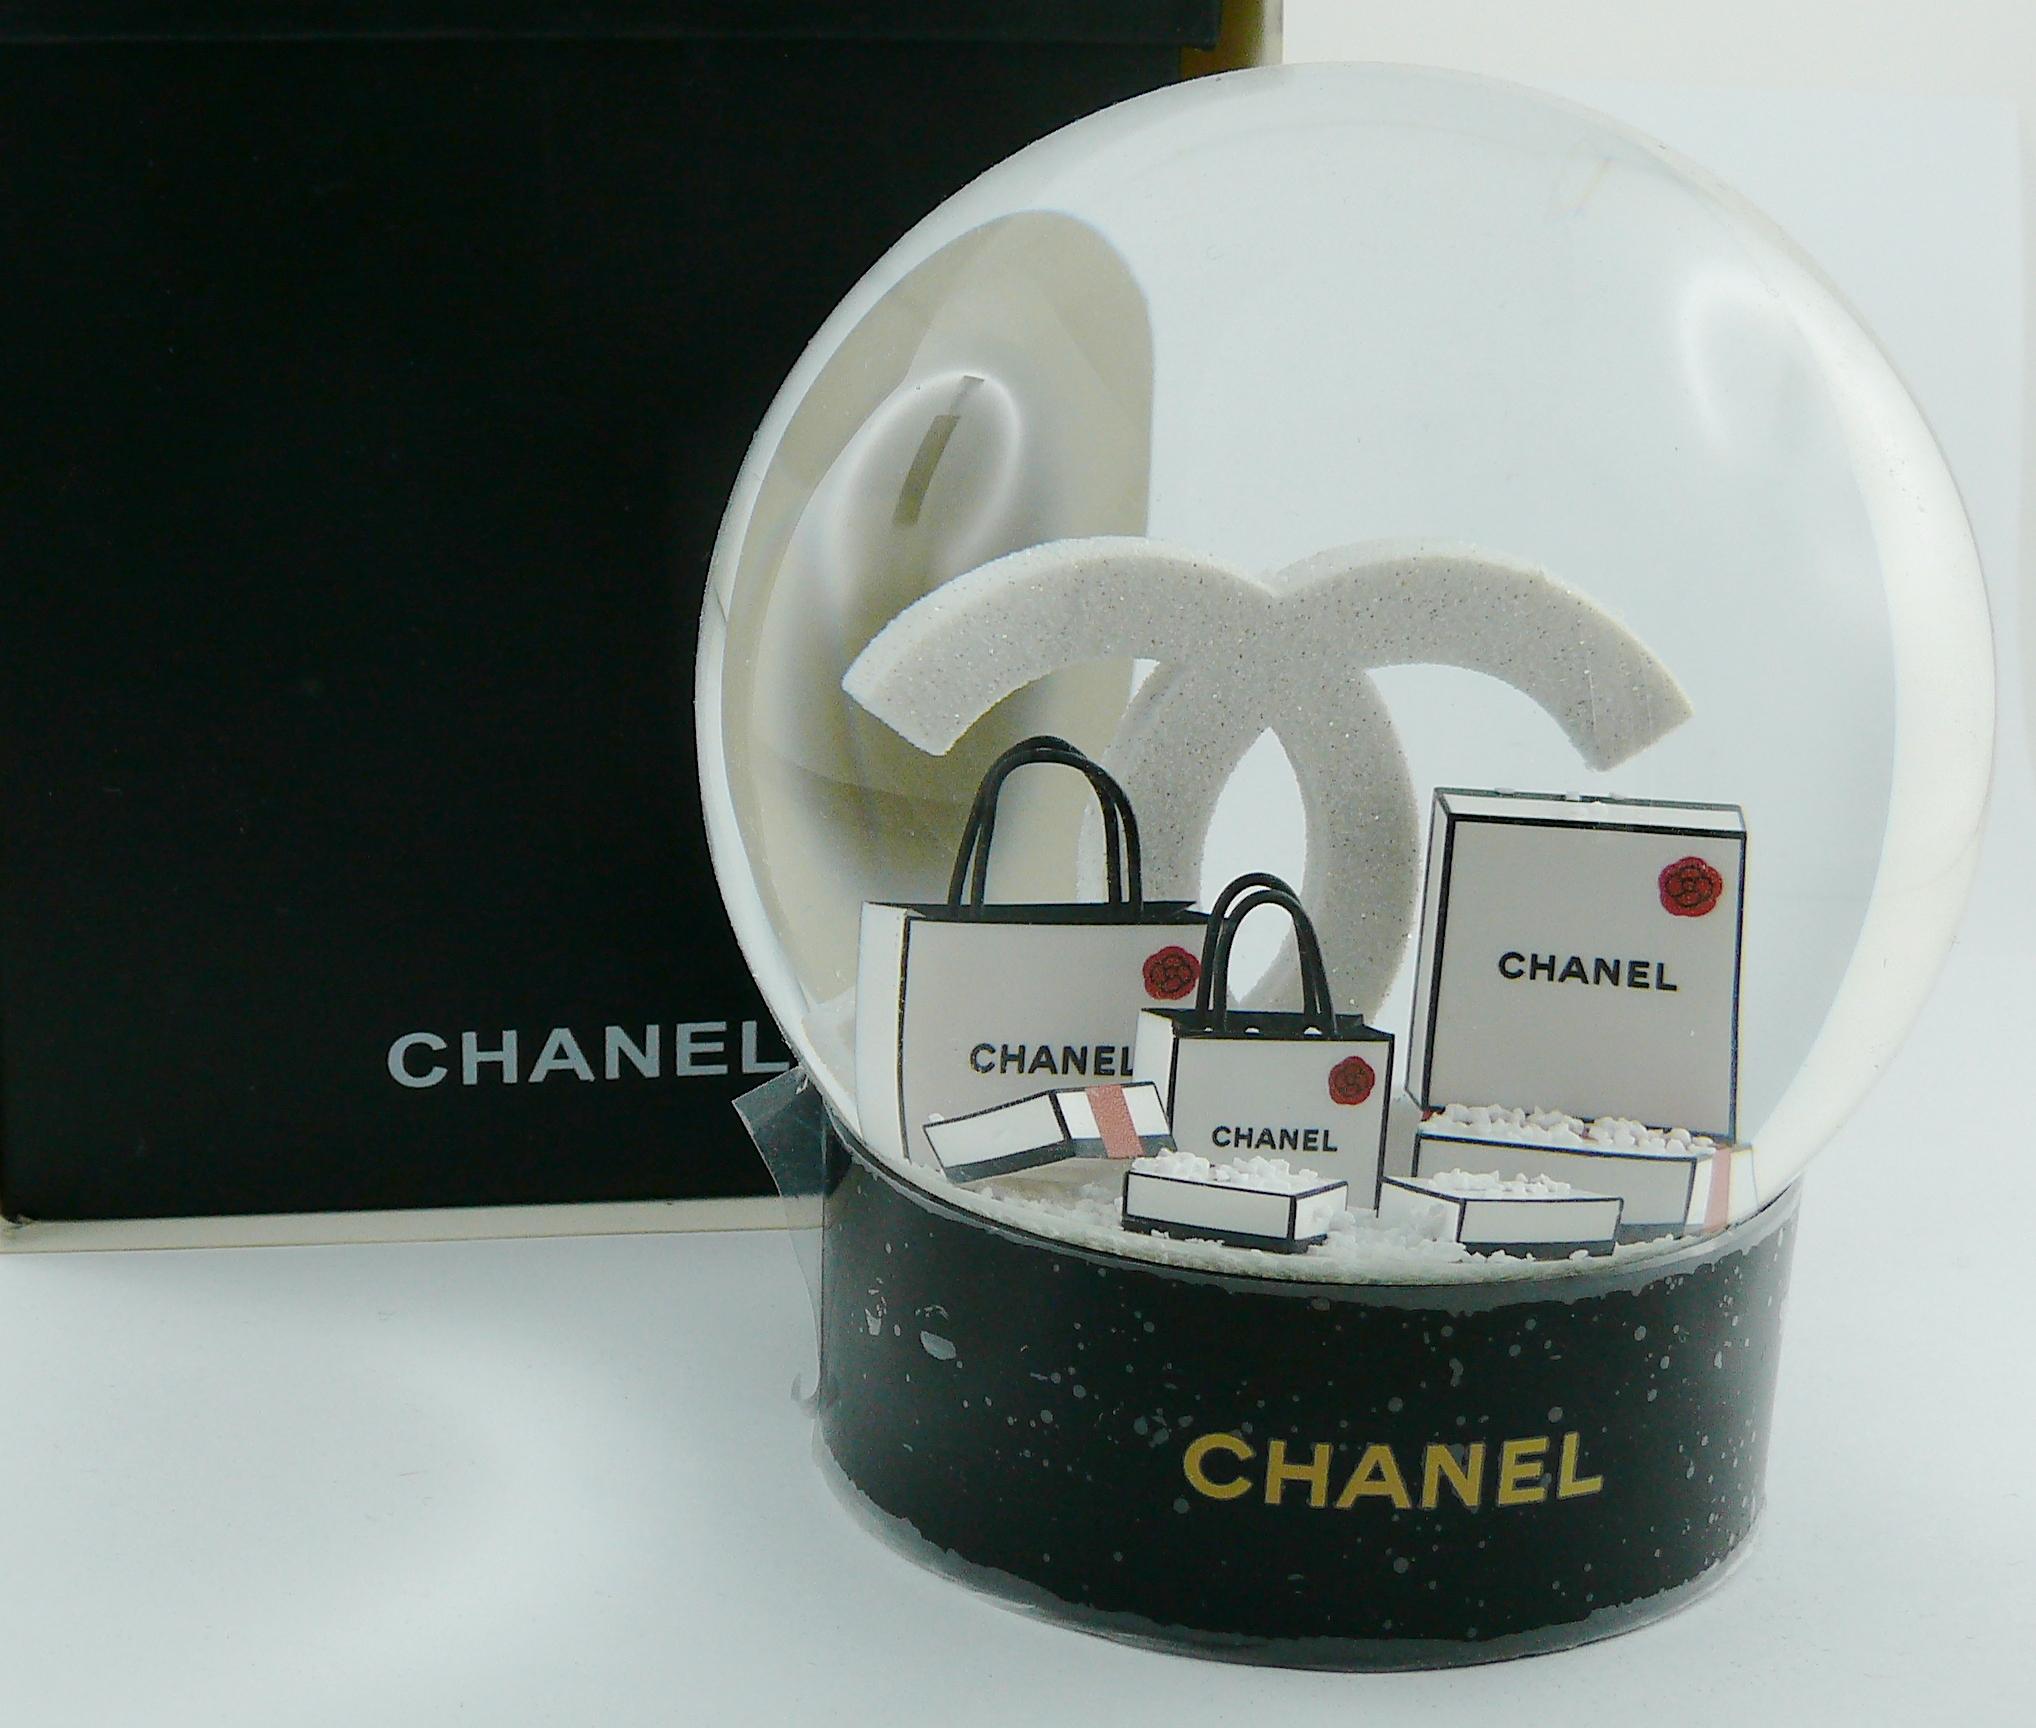 CHANEL VIP gift snow dome.

Indicative measurements : height approx. 11 cm (4.33 inches) / base diameter approx. 7.5 cm (2.95 inches).

Comes with original packaging (used condition).

NOTES
- This is a preloved item, therefore it might have